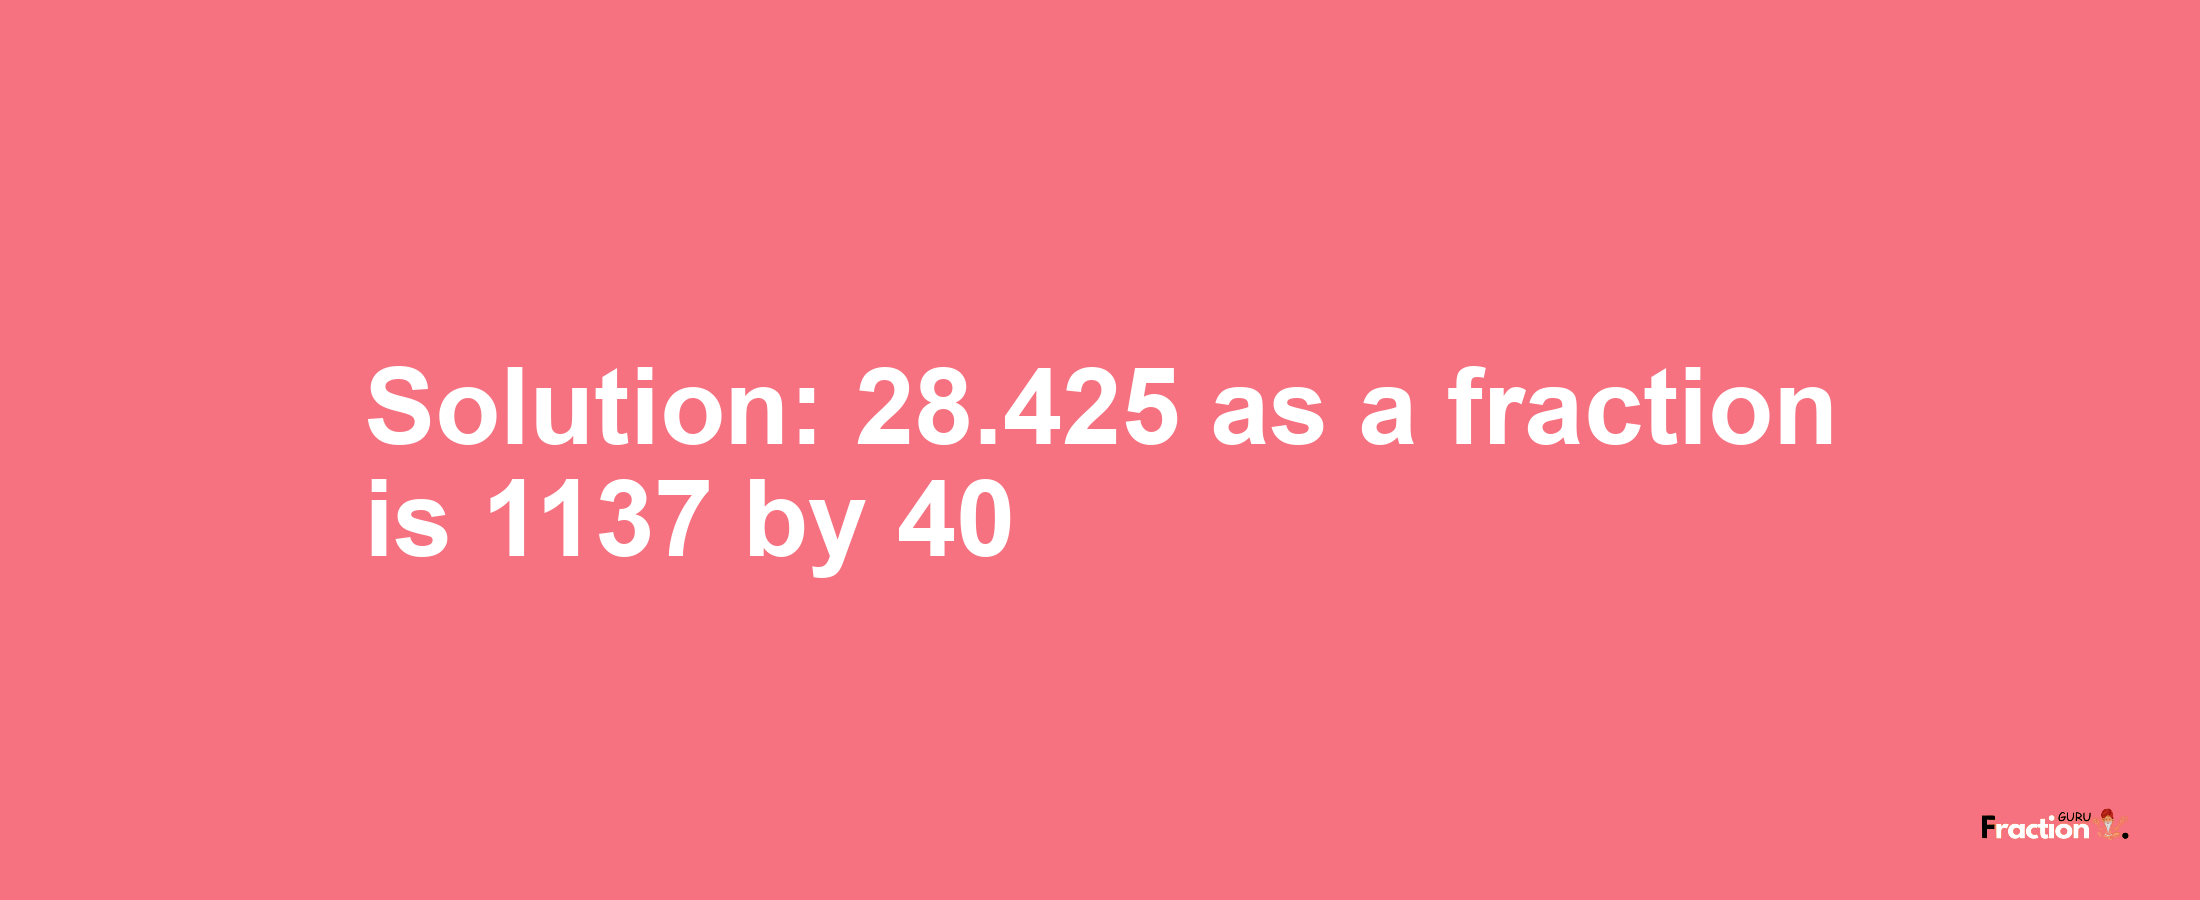 Solution:28.425 as a fraction is 1137/40